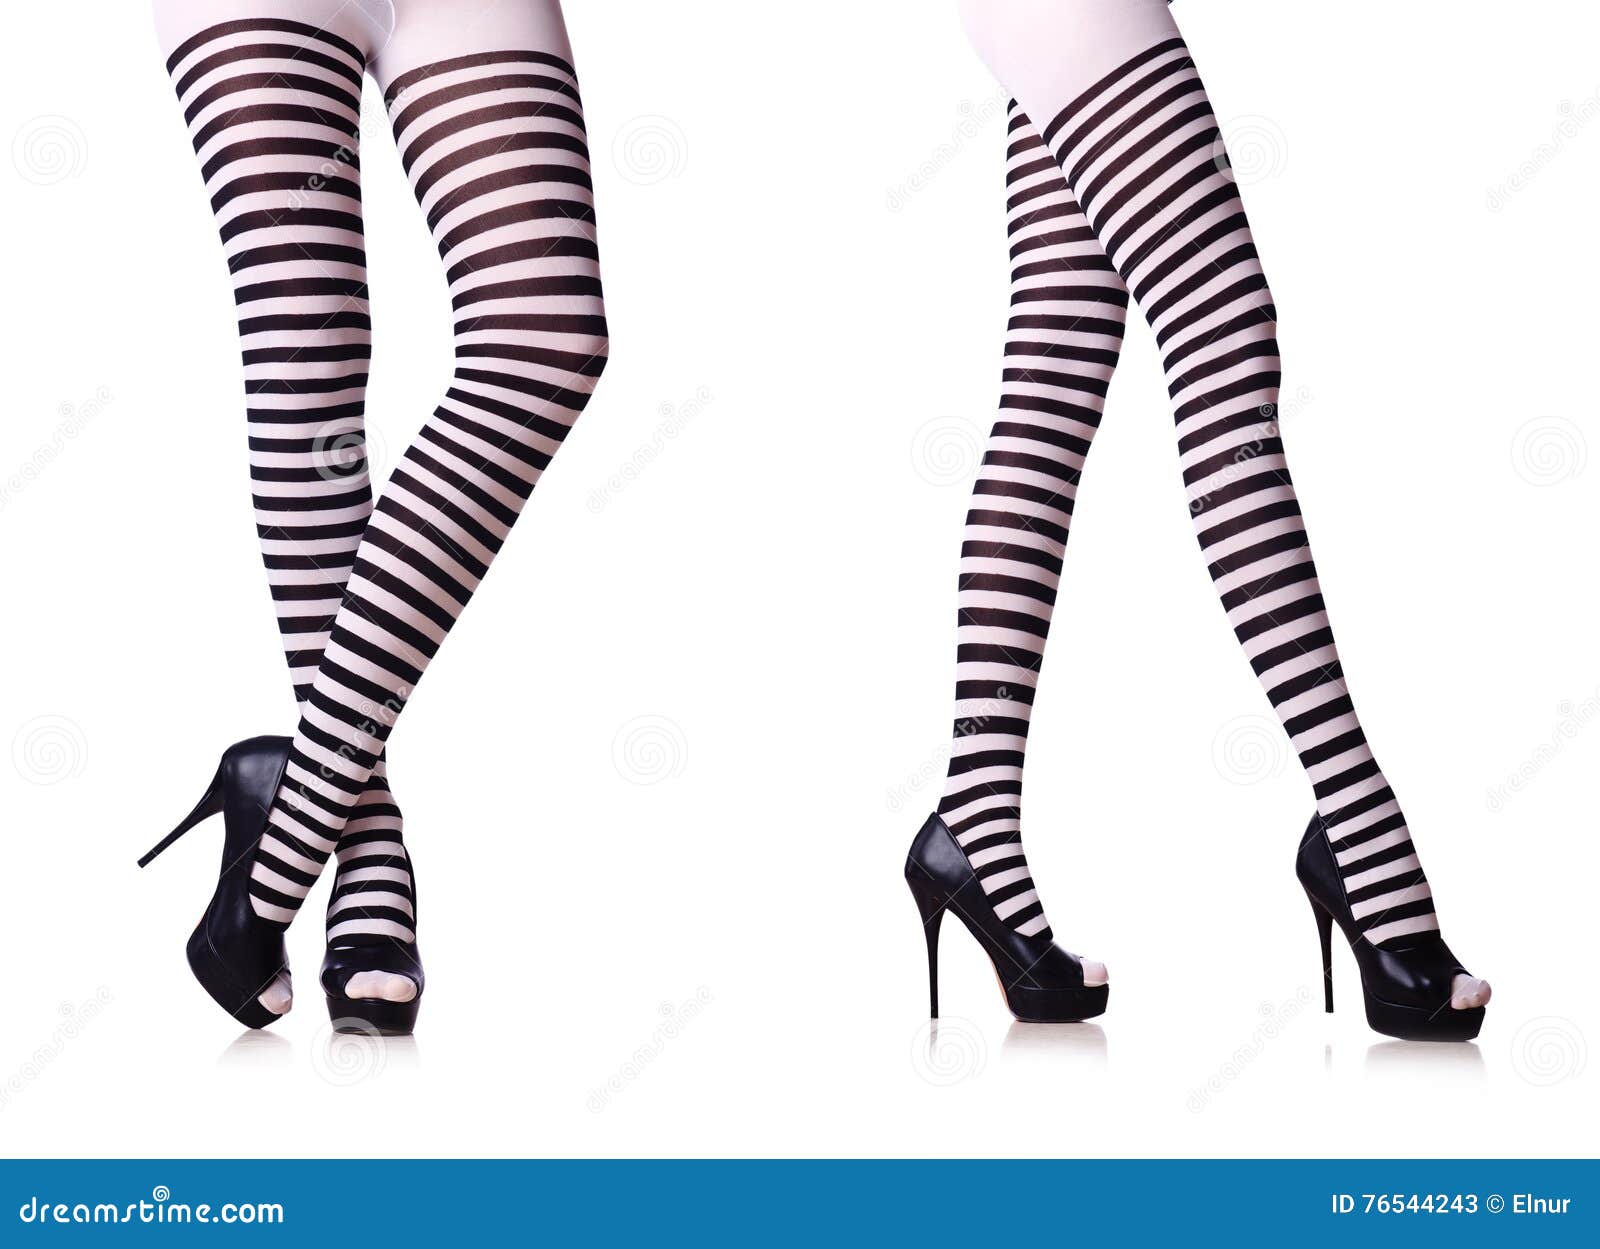 The Legs With Striped Stockings Isolated On White Stock Image Image